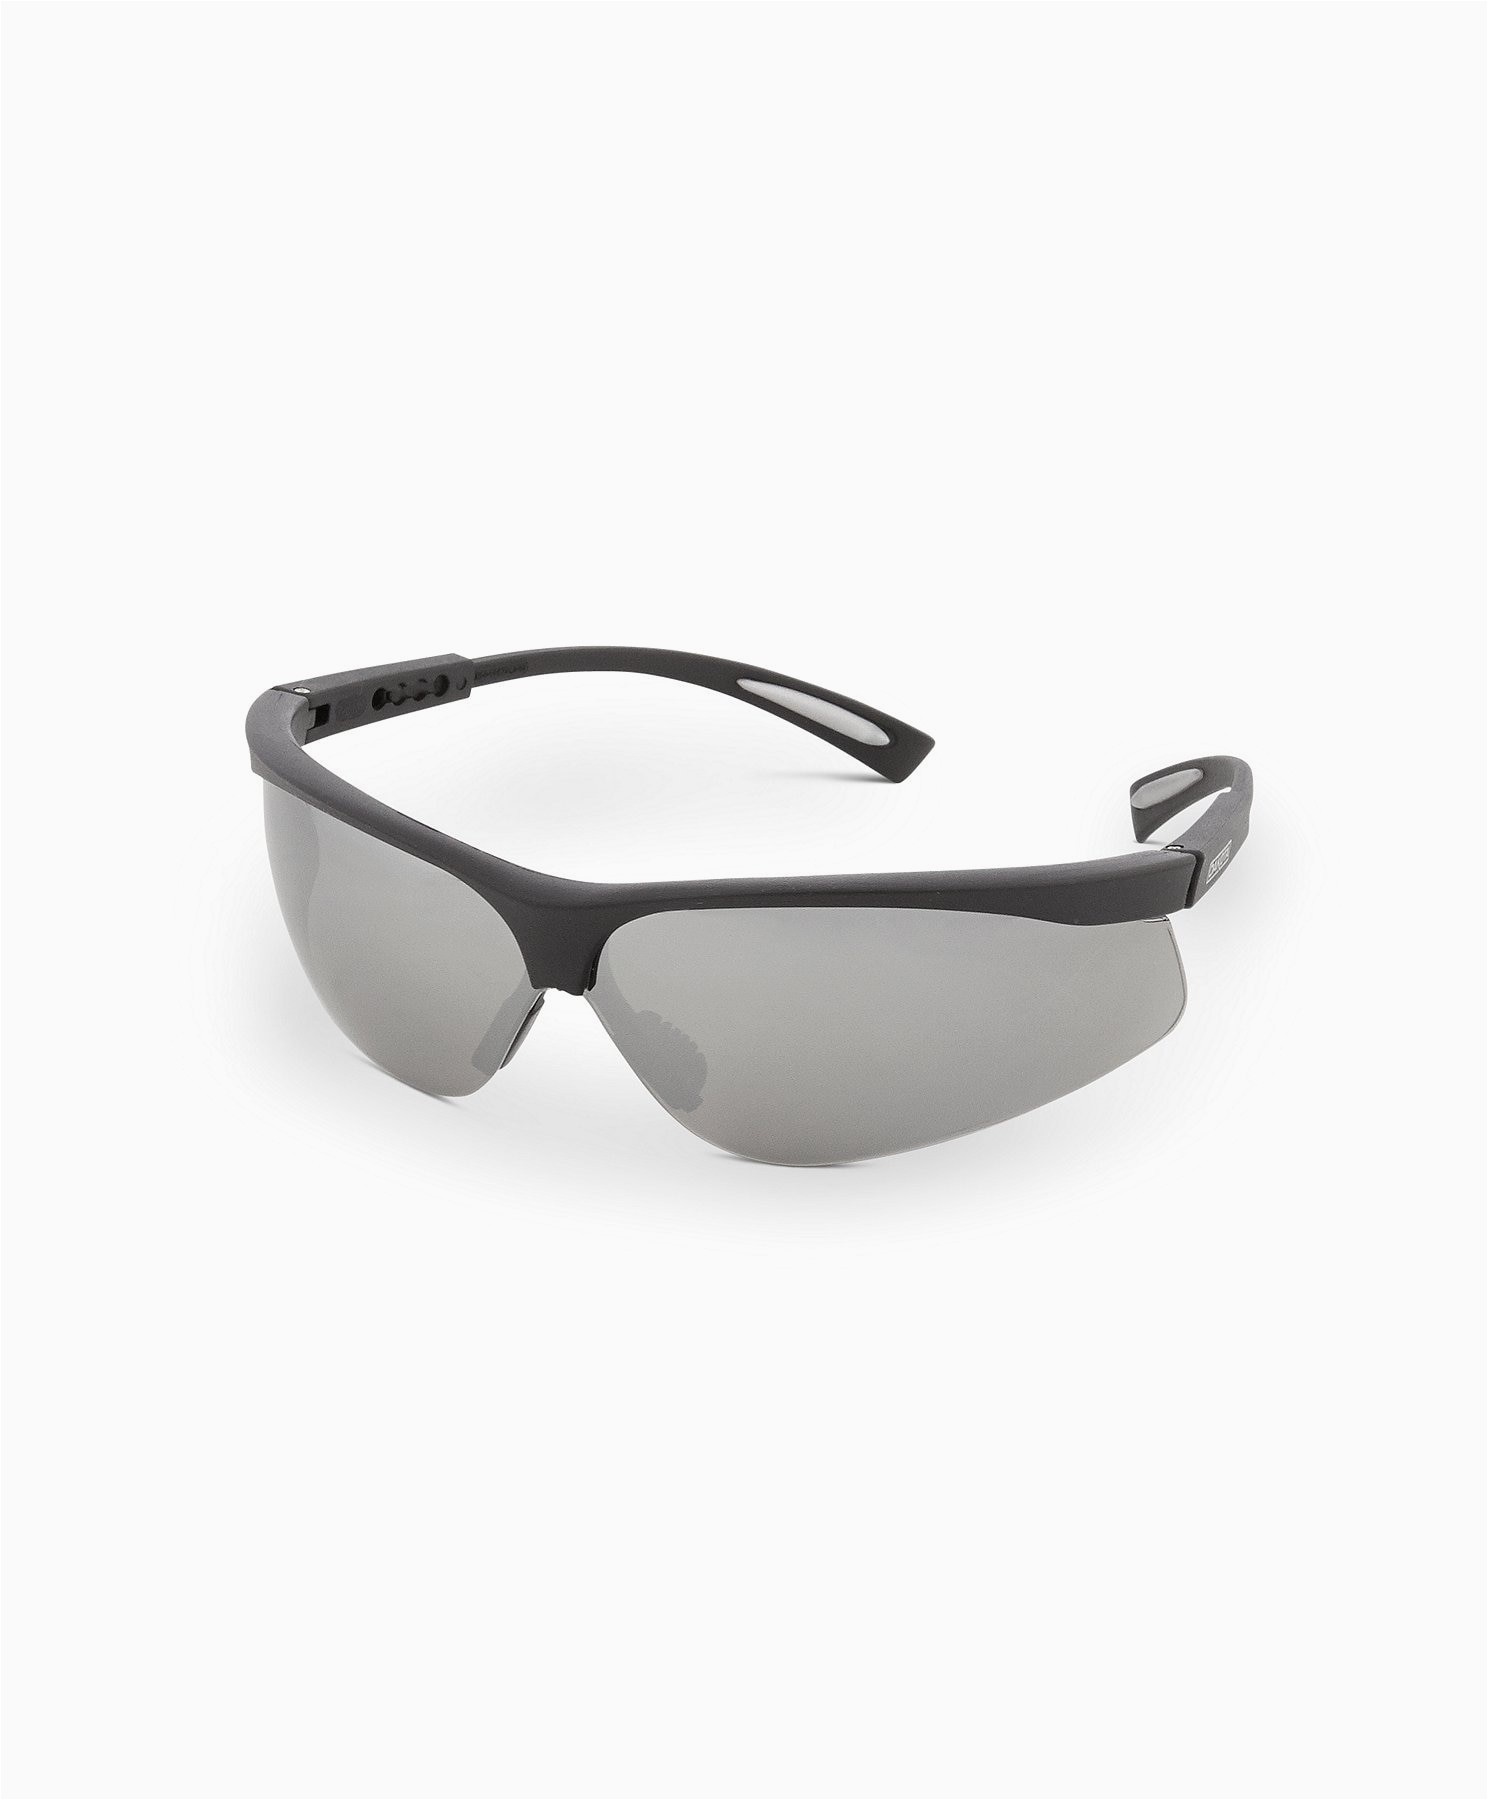 Rugged Blue Safety Glasses Smoked Mirror Safety Glasses